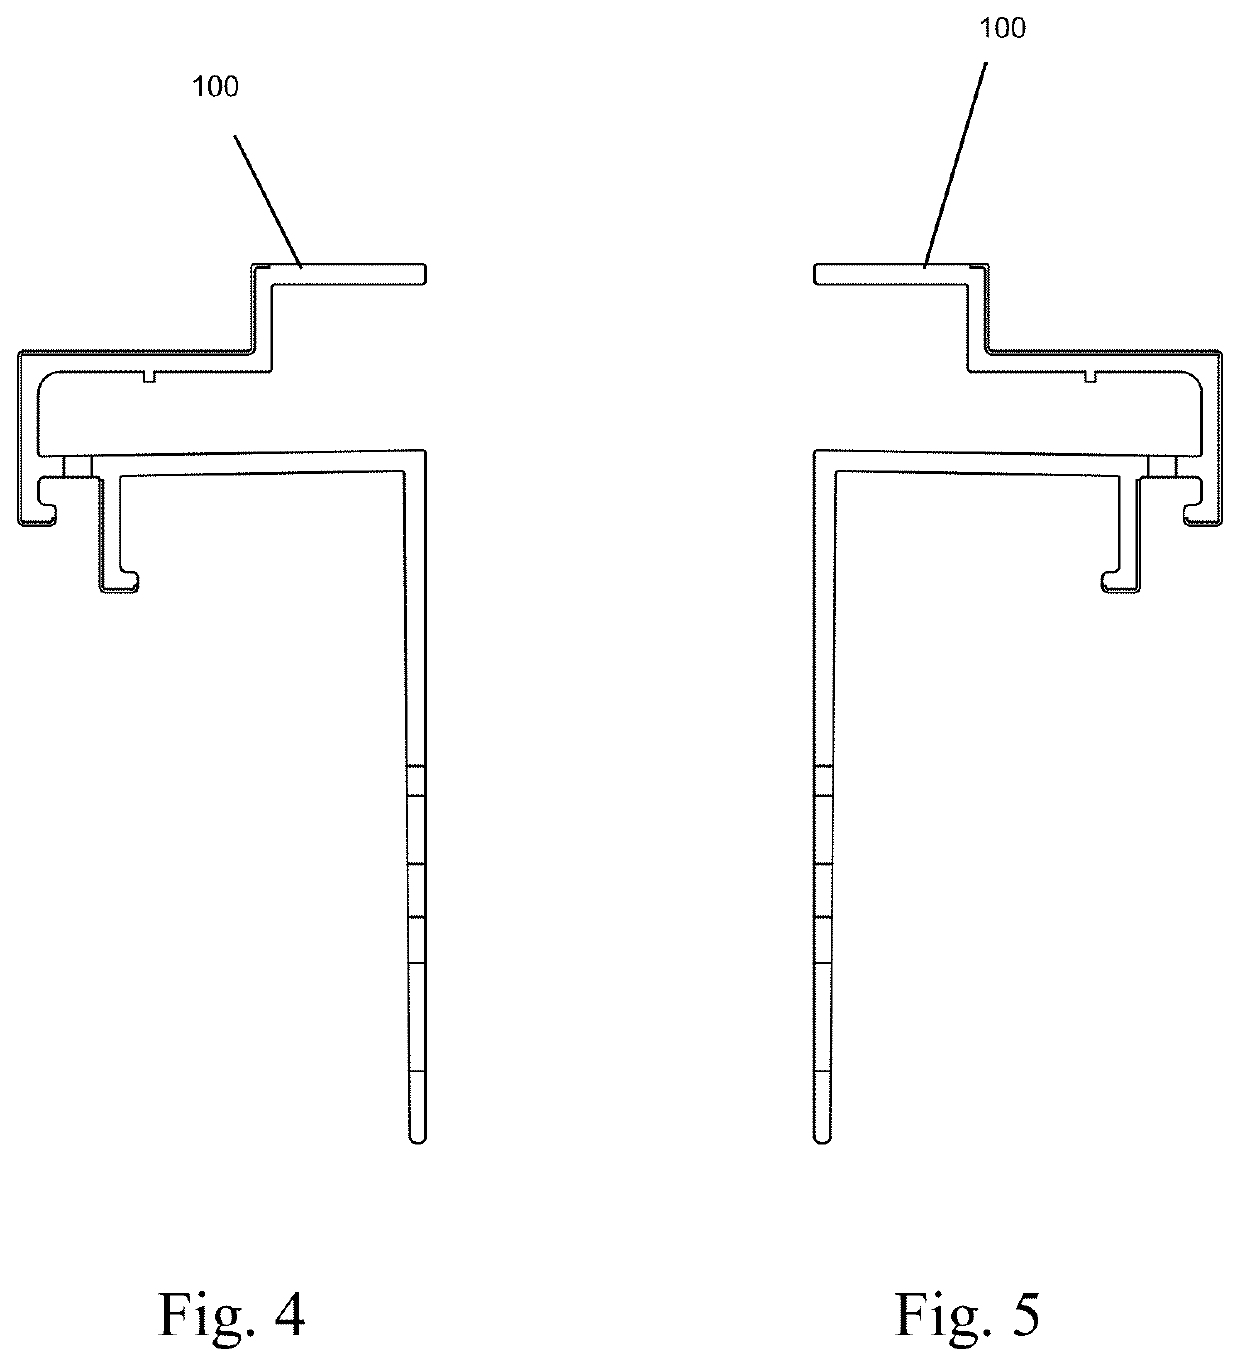 Top of wall ventilation screed device and assembly